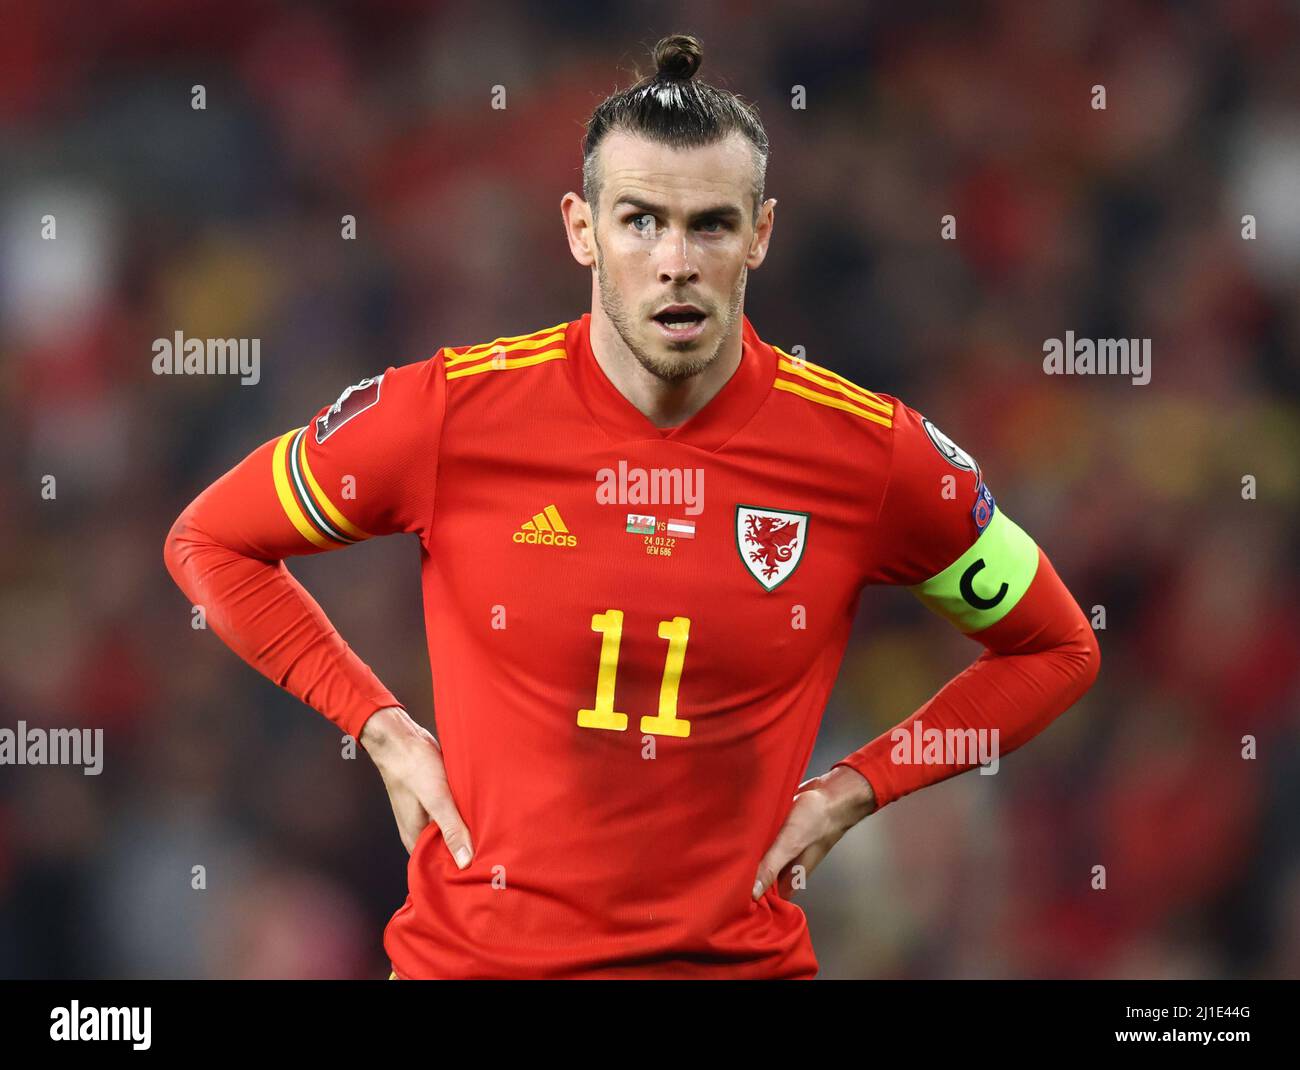 Cardiff, Wales, 24th March 2022. Gareth Bale of Wales during the